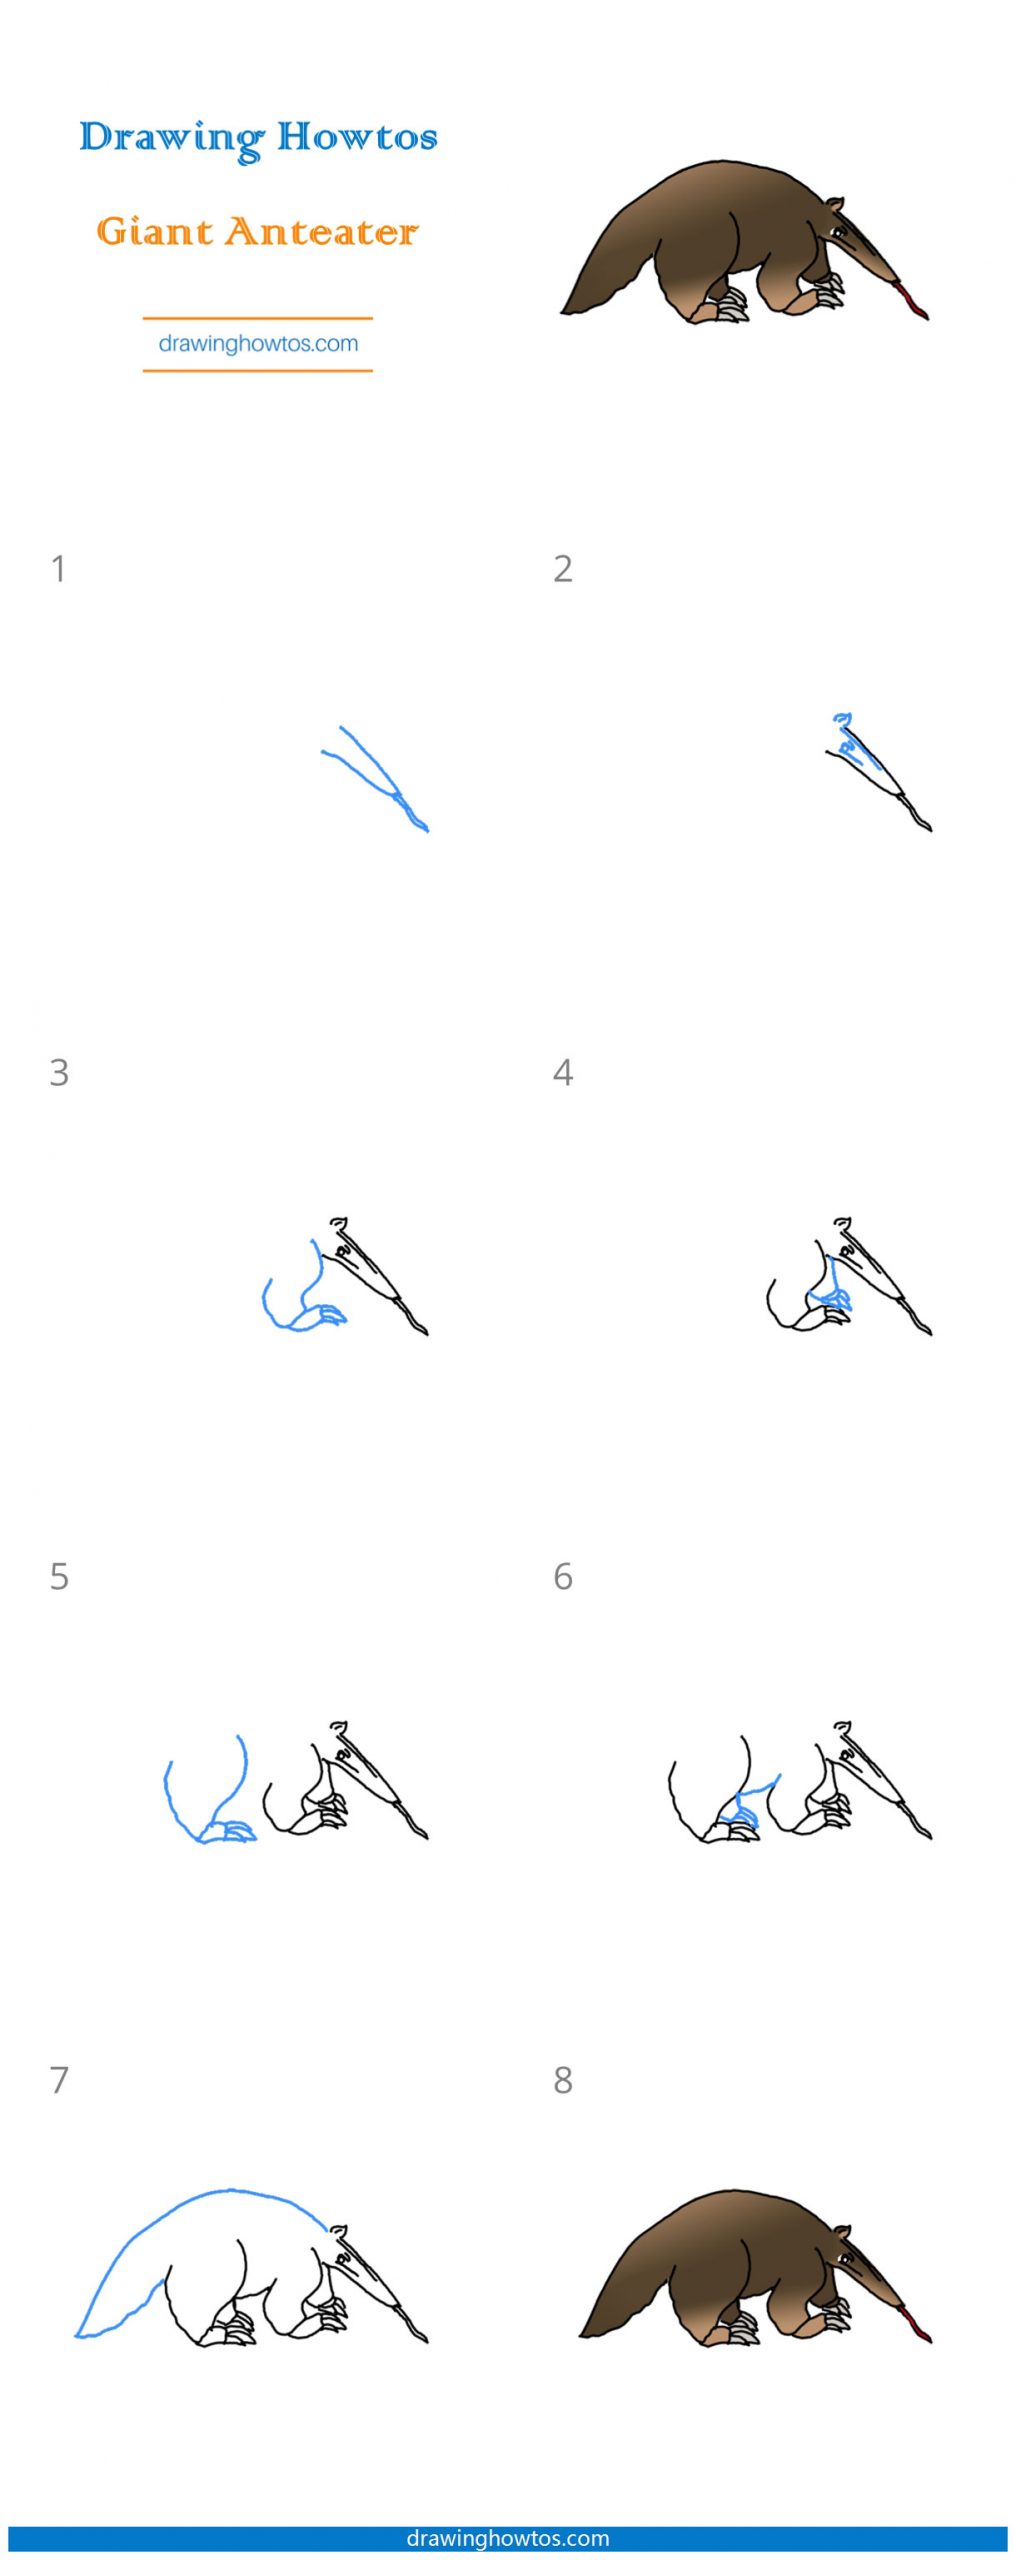 How to Draw a Giant Anteater Step by Step